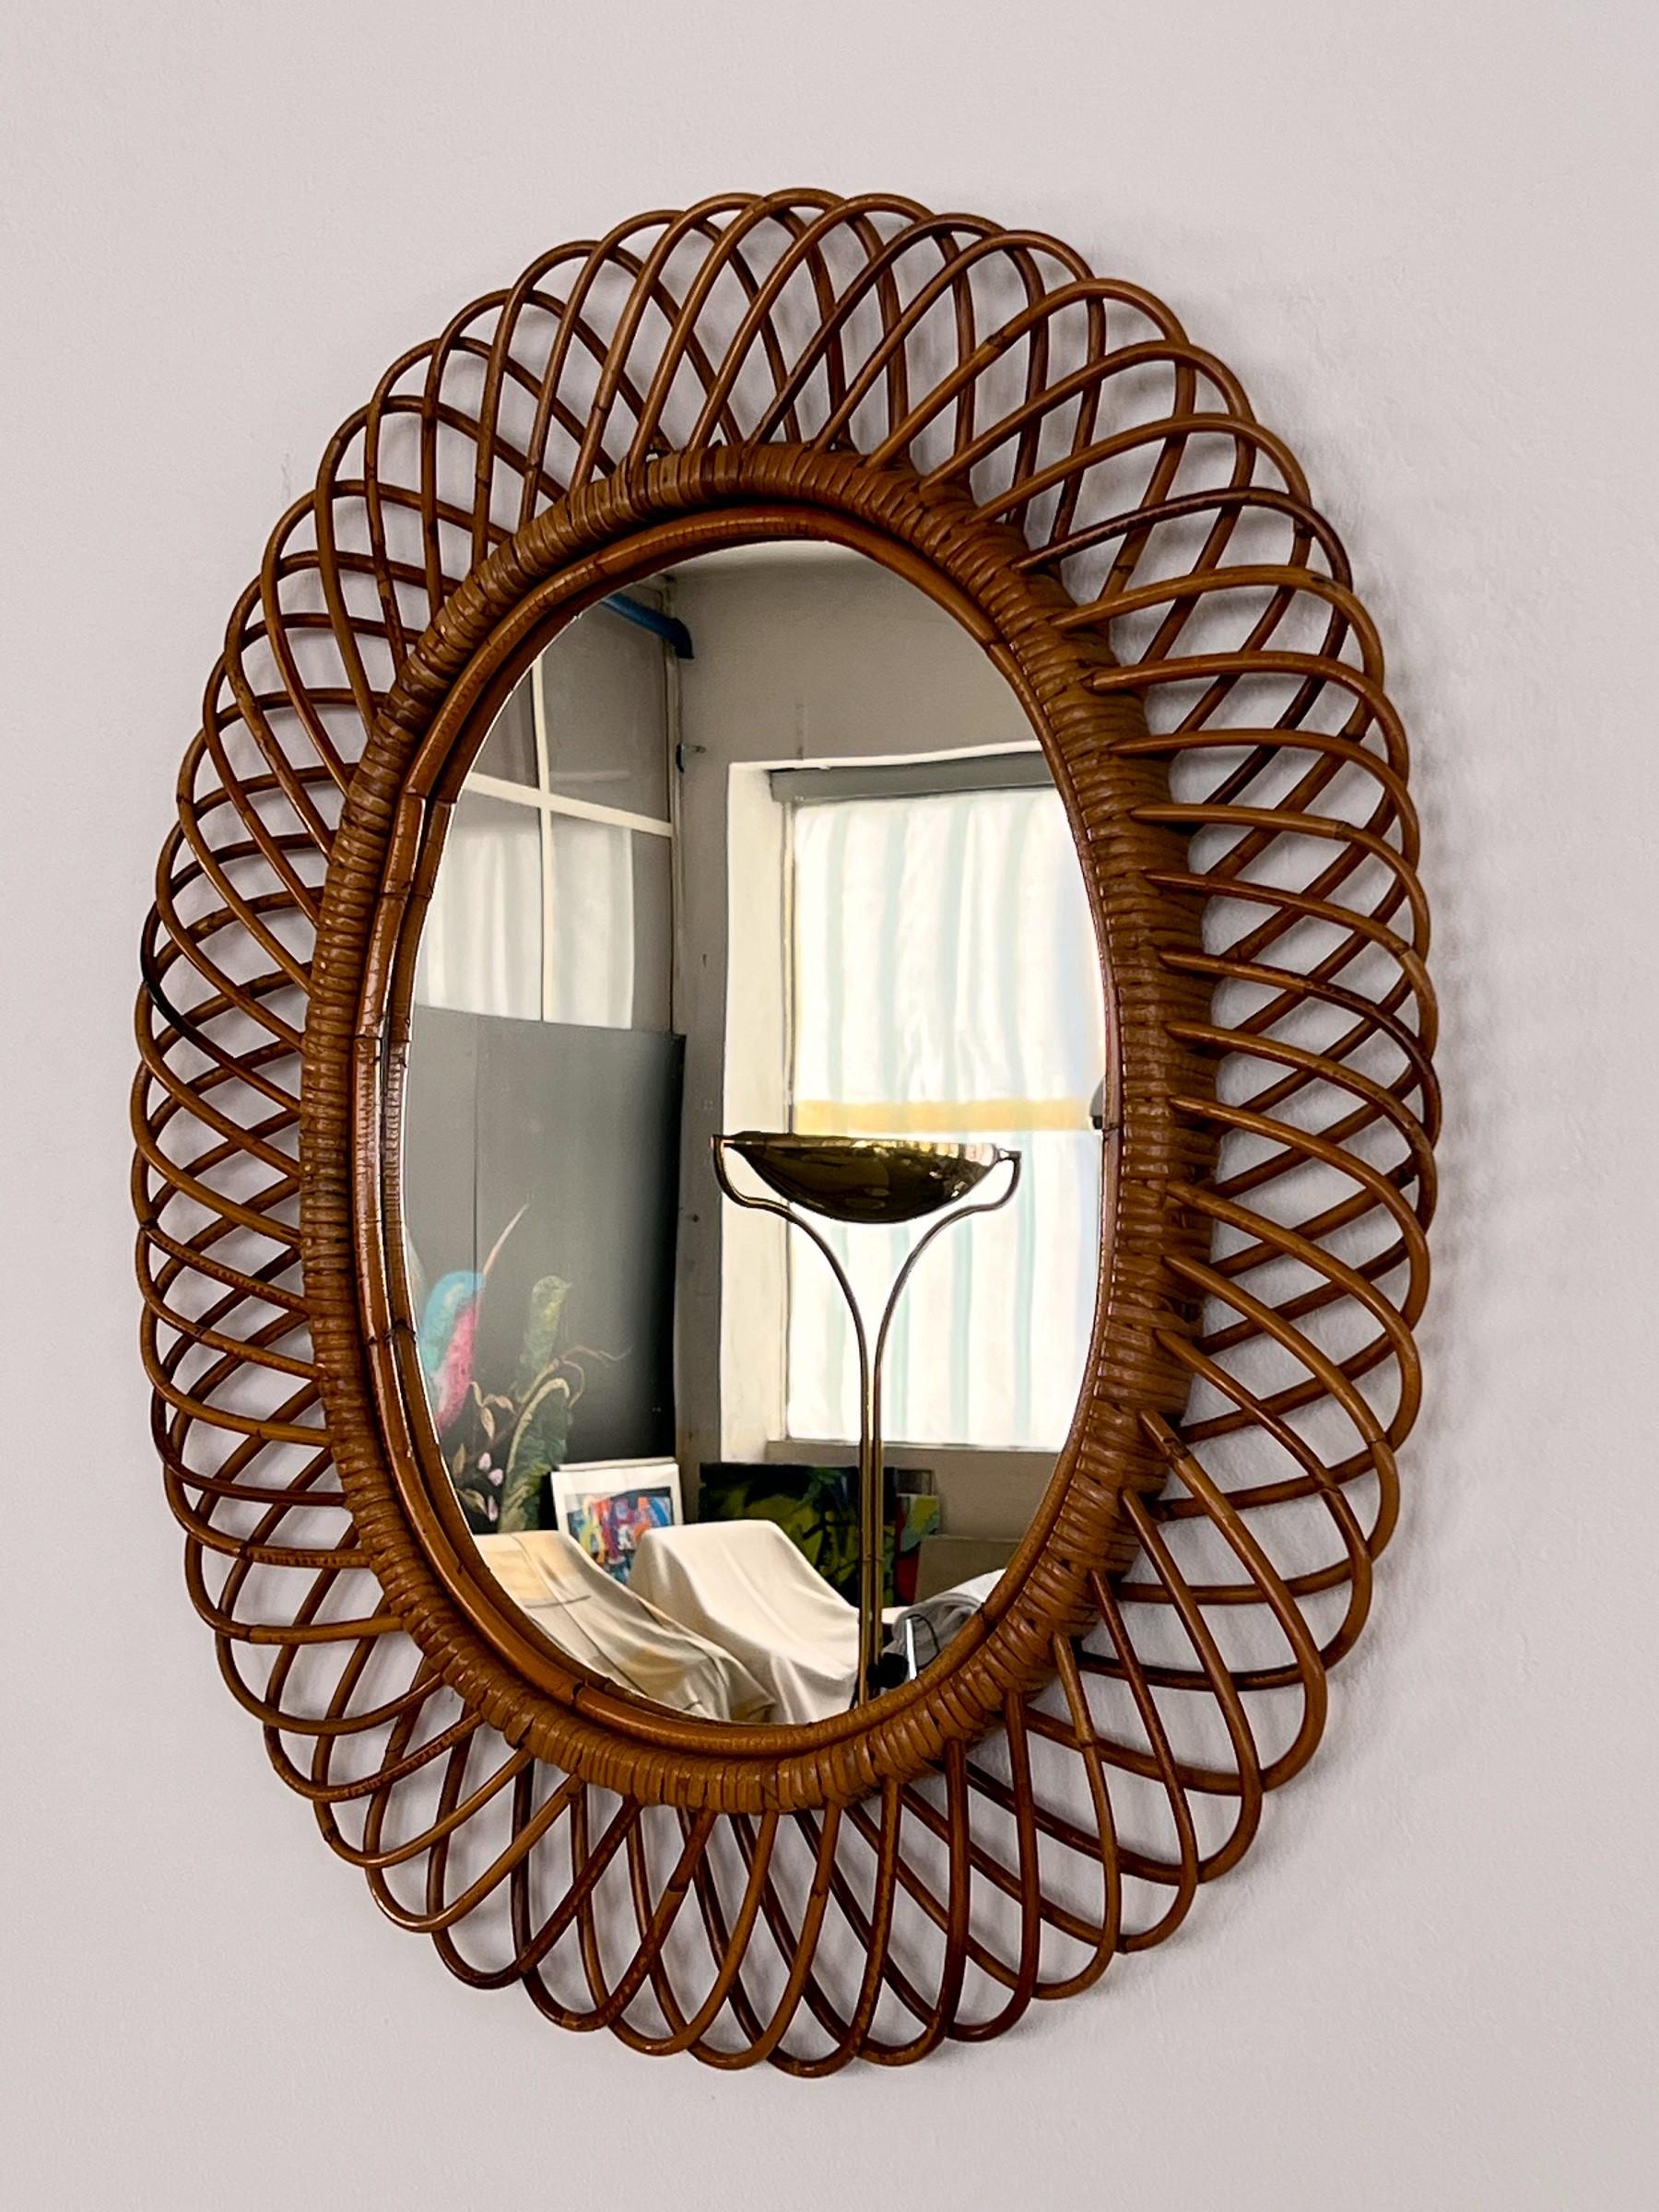 Beautiful Italian organic wall mirror which features a big oval frame made of rattan with bark.
The mirror is made in Italy typically for the 1960s, made in style of Franco Albini.
The mirror glass is in very good condition with minimal signs of